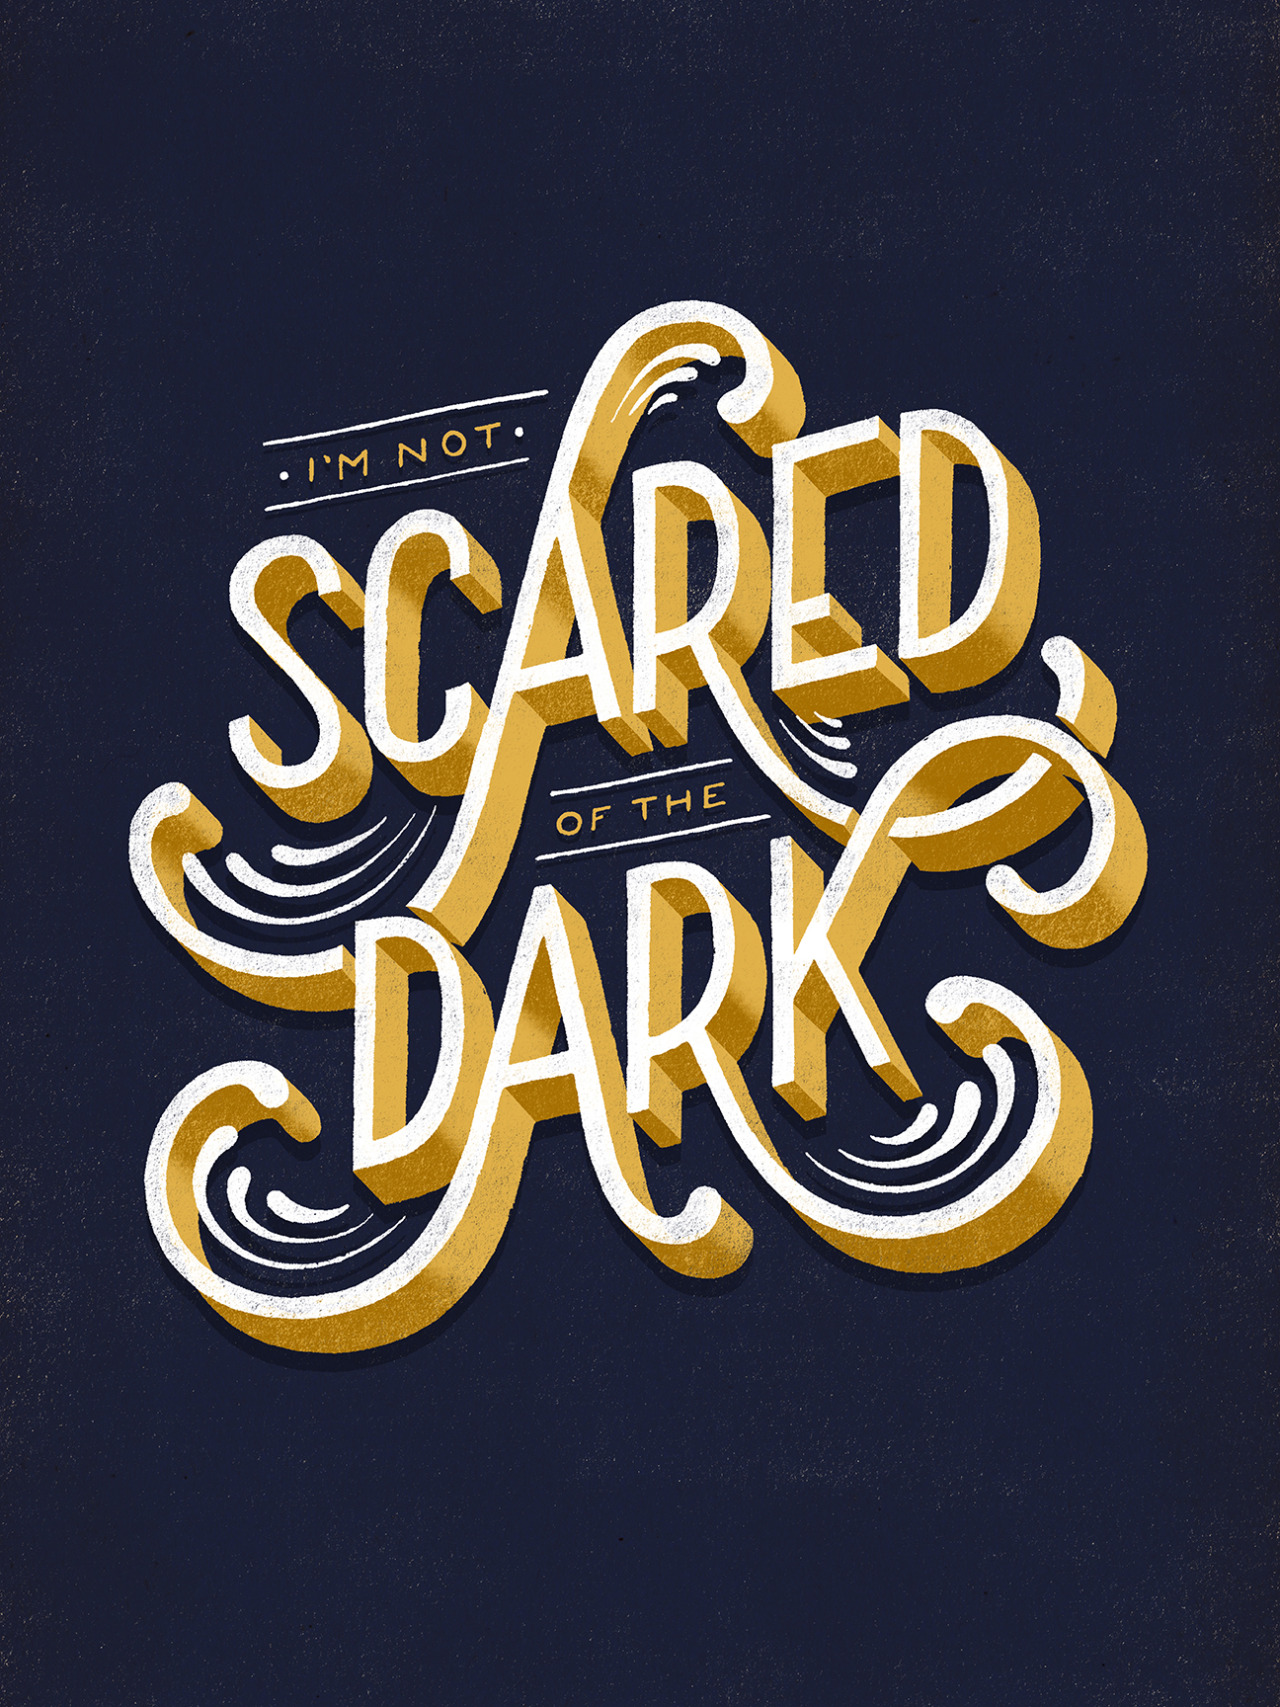 Scared of the dark part